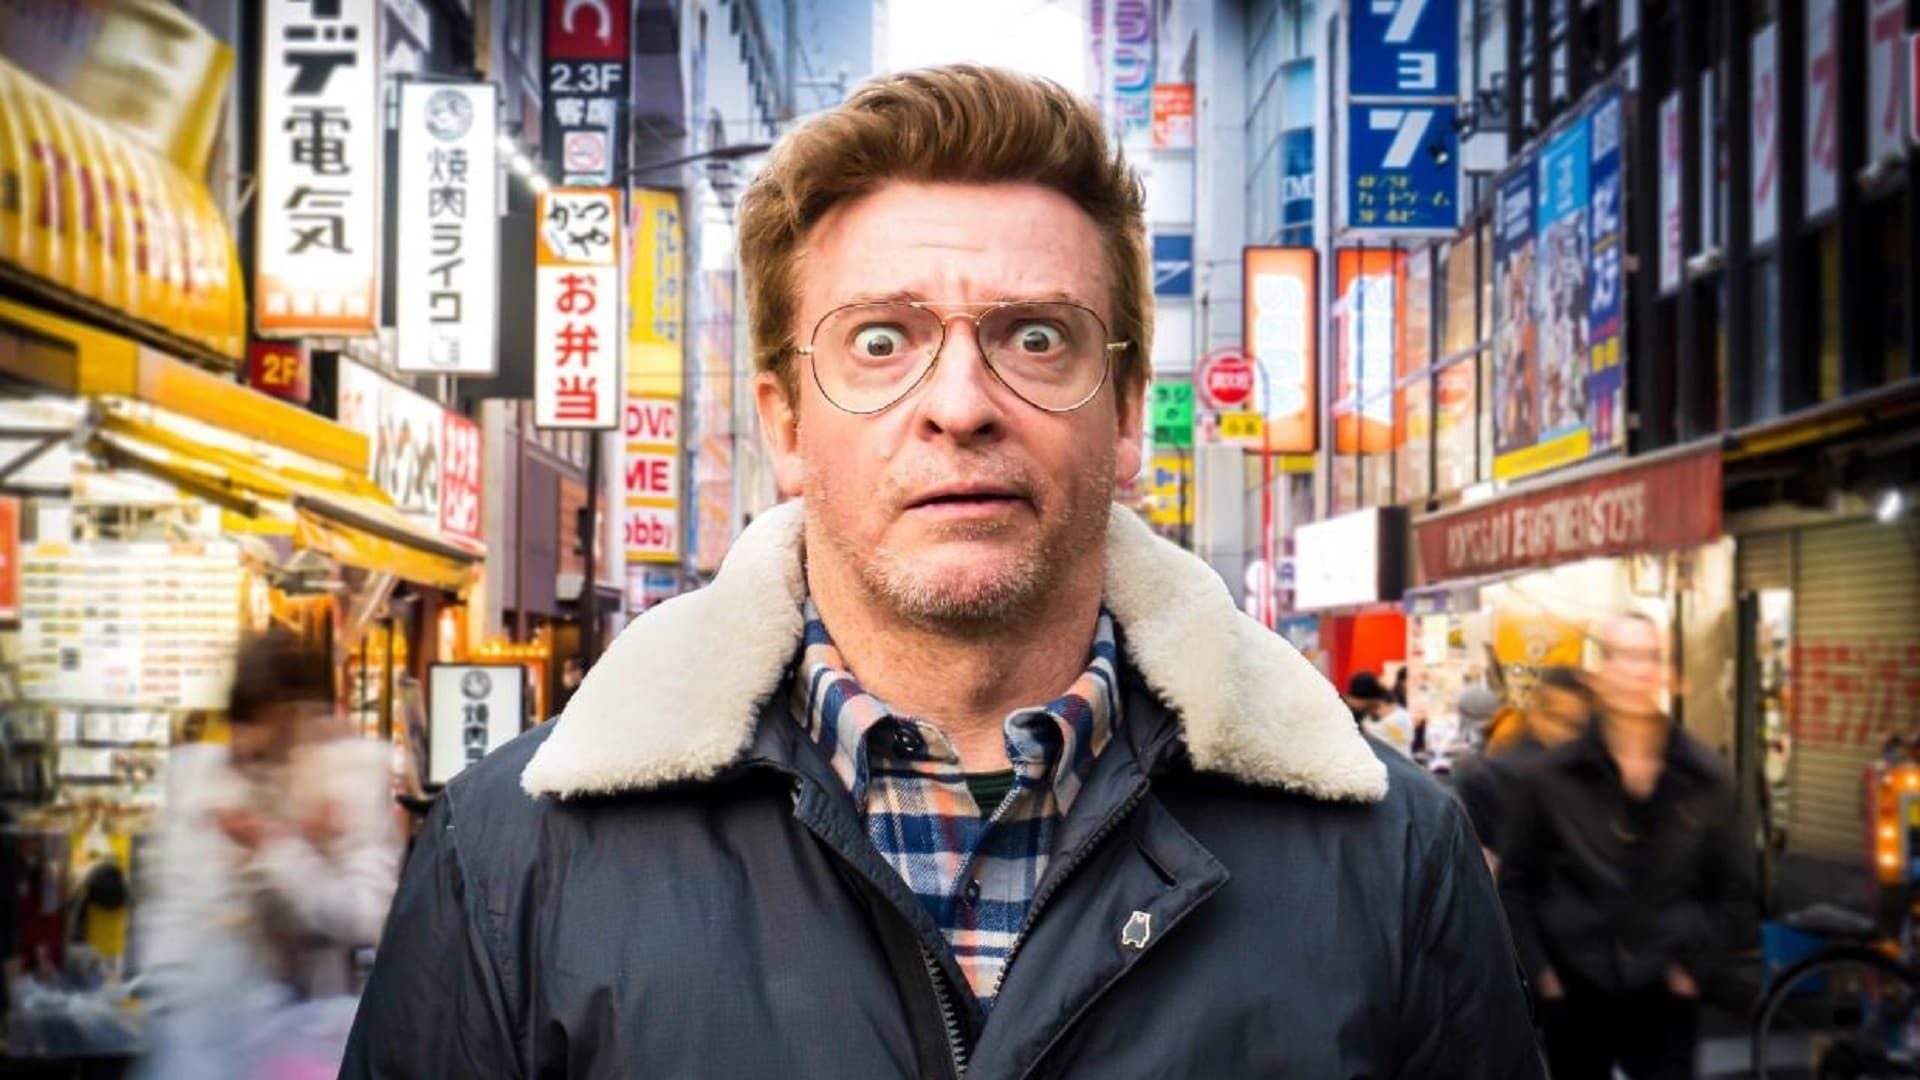 Rhys Darby in Japan background